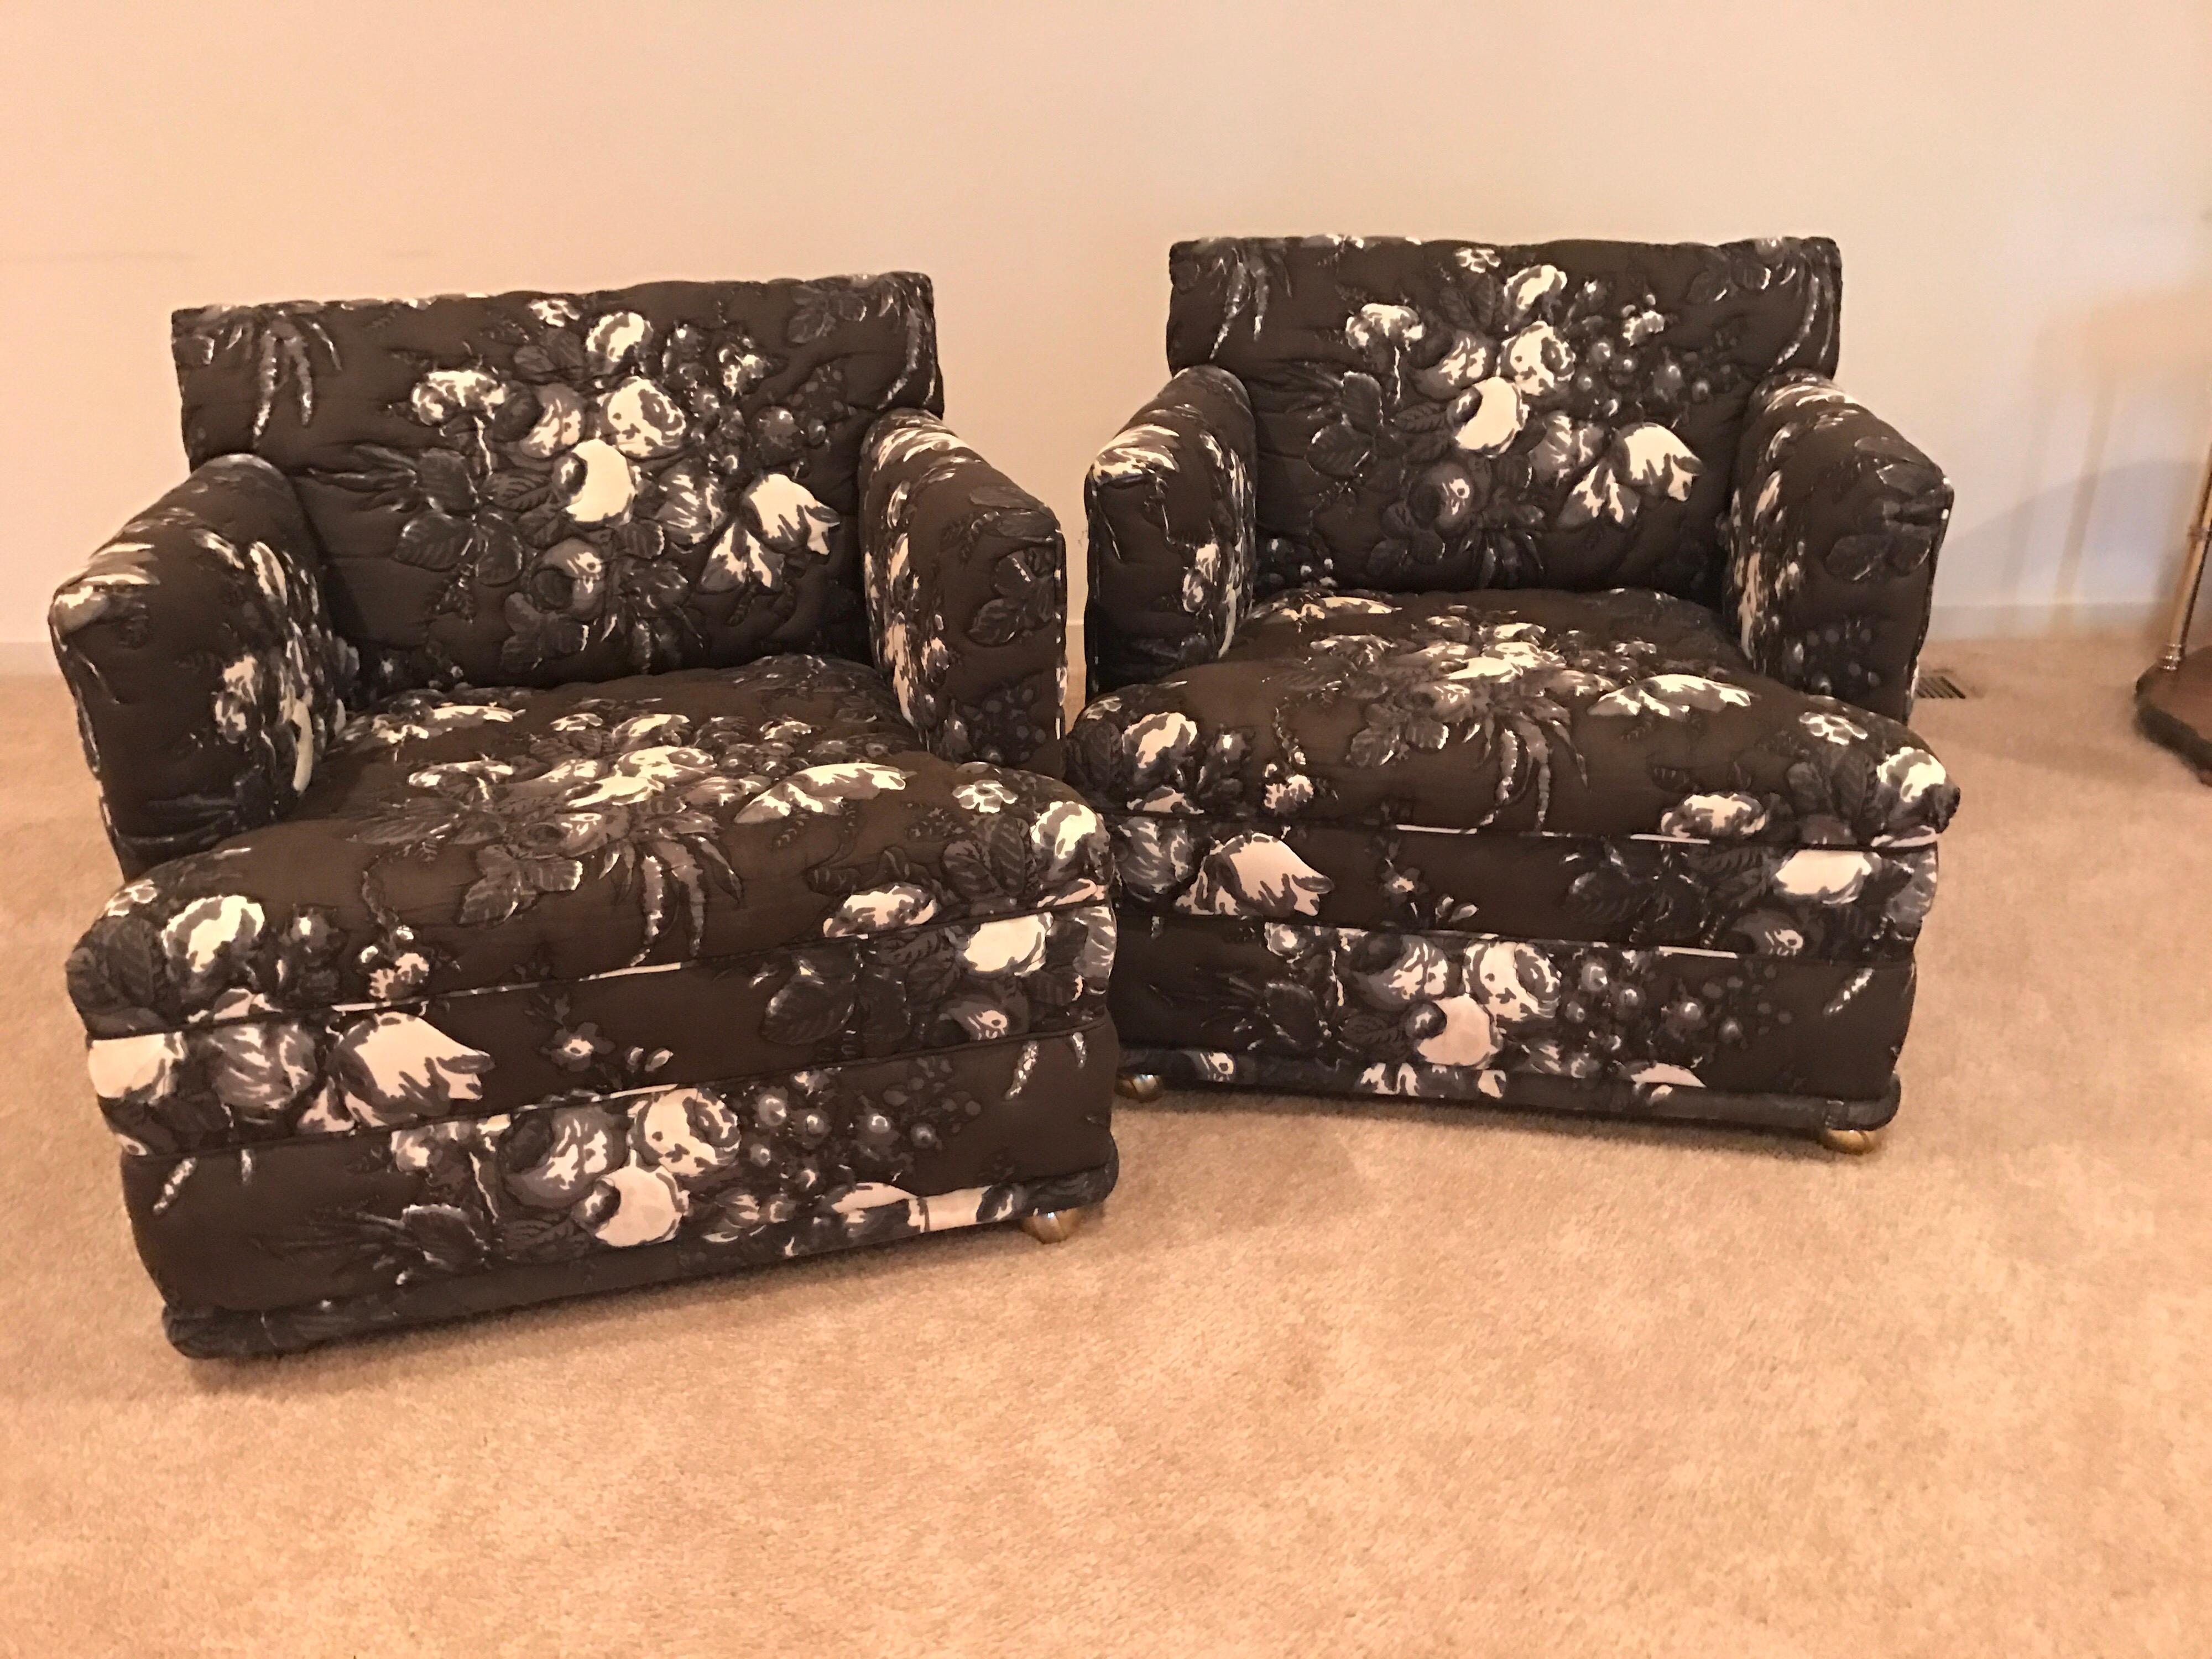 Pair of matching upholstered lounge chairs on casters from the 1970s. Black and white quilted floral upholstery is original and in excellent condition.